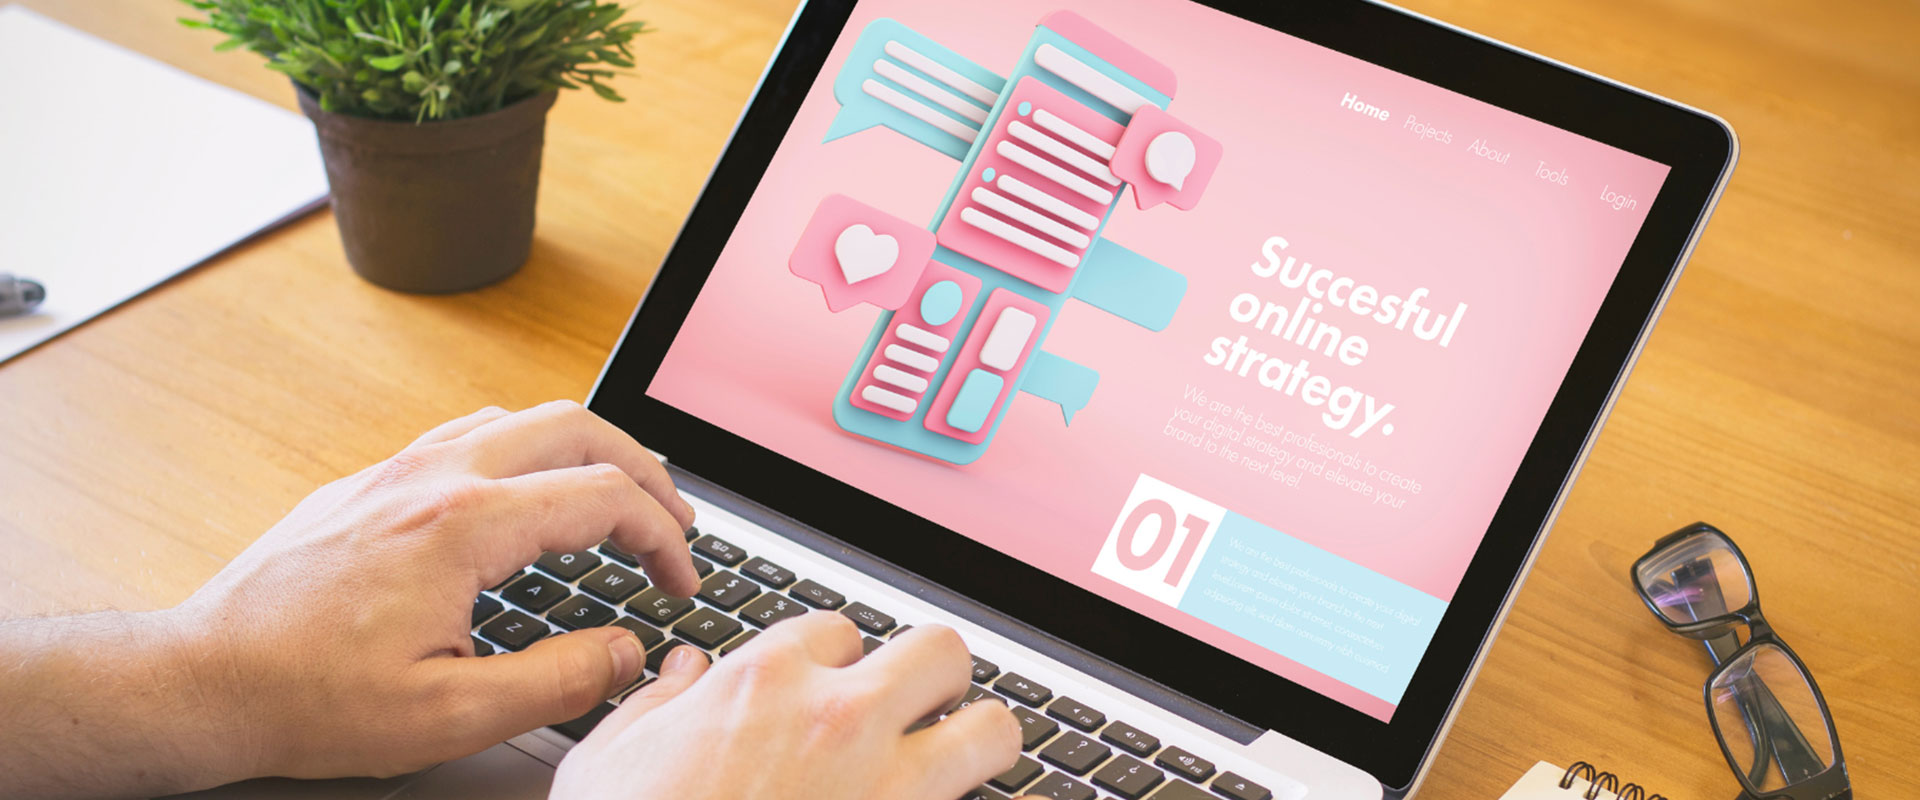 The Role of Digital Marketing in Building an Effective Online Strategy